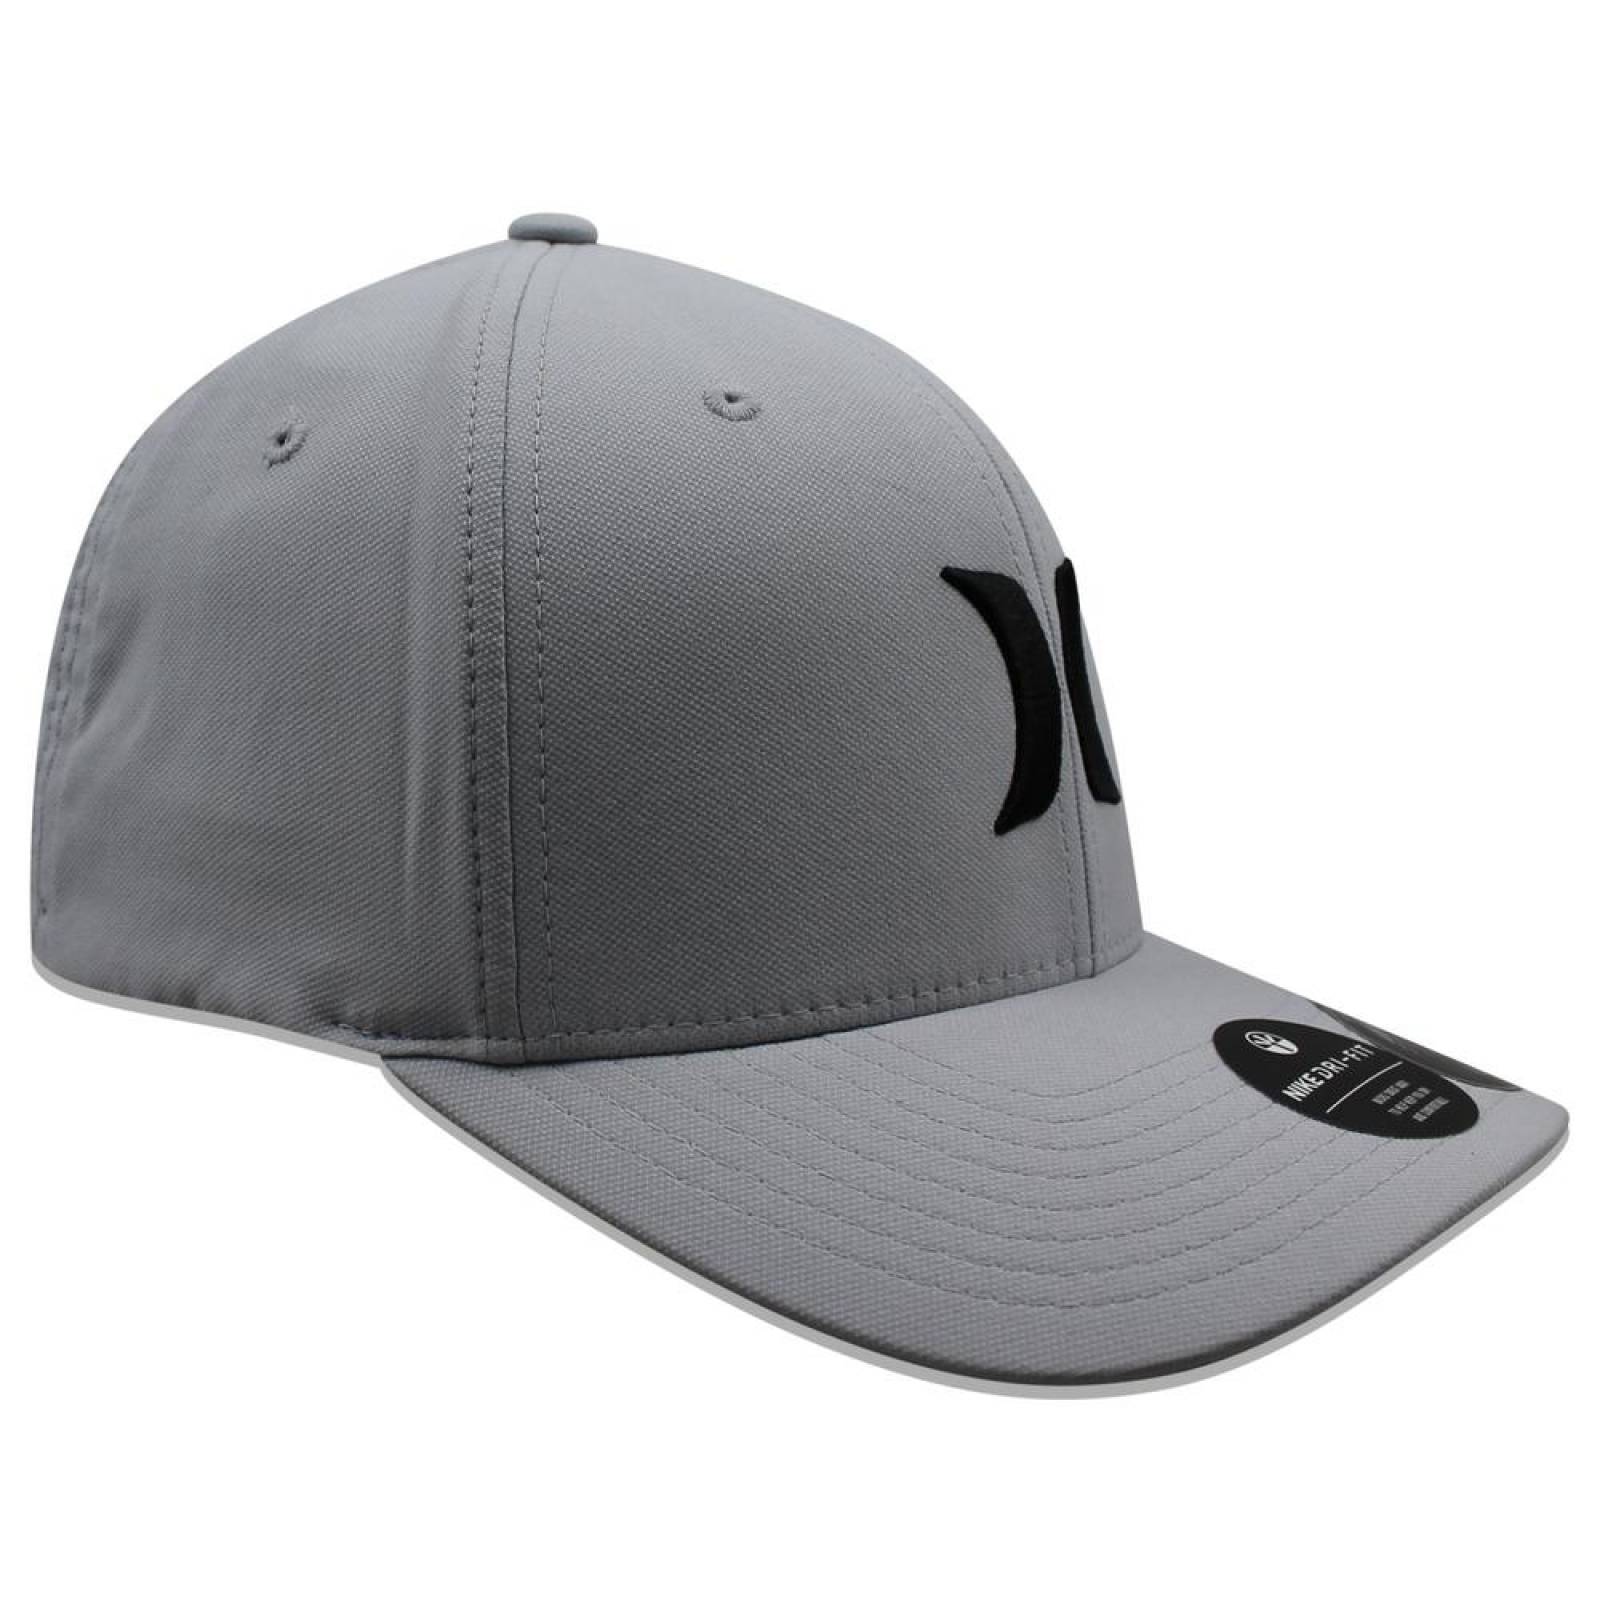 Gorra Hurley Dri Fit One and Only Gris 